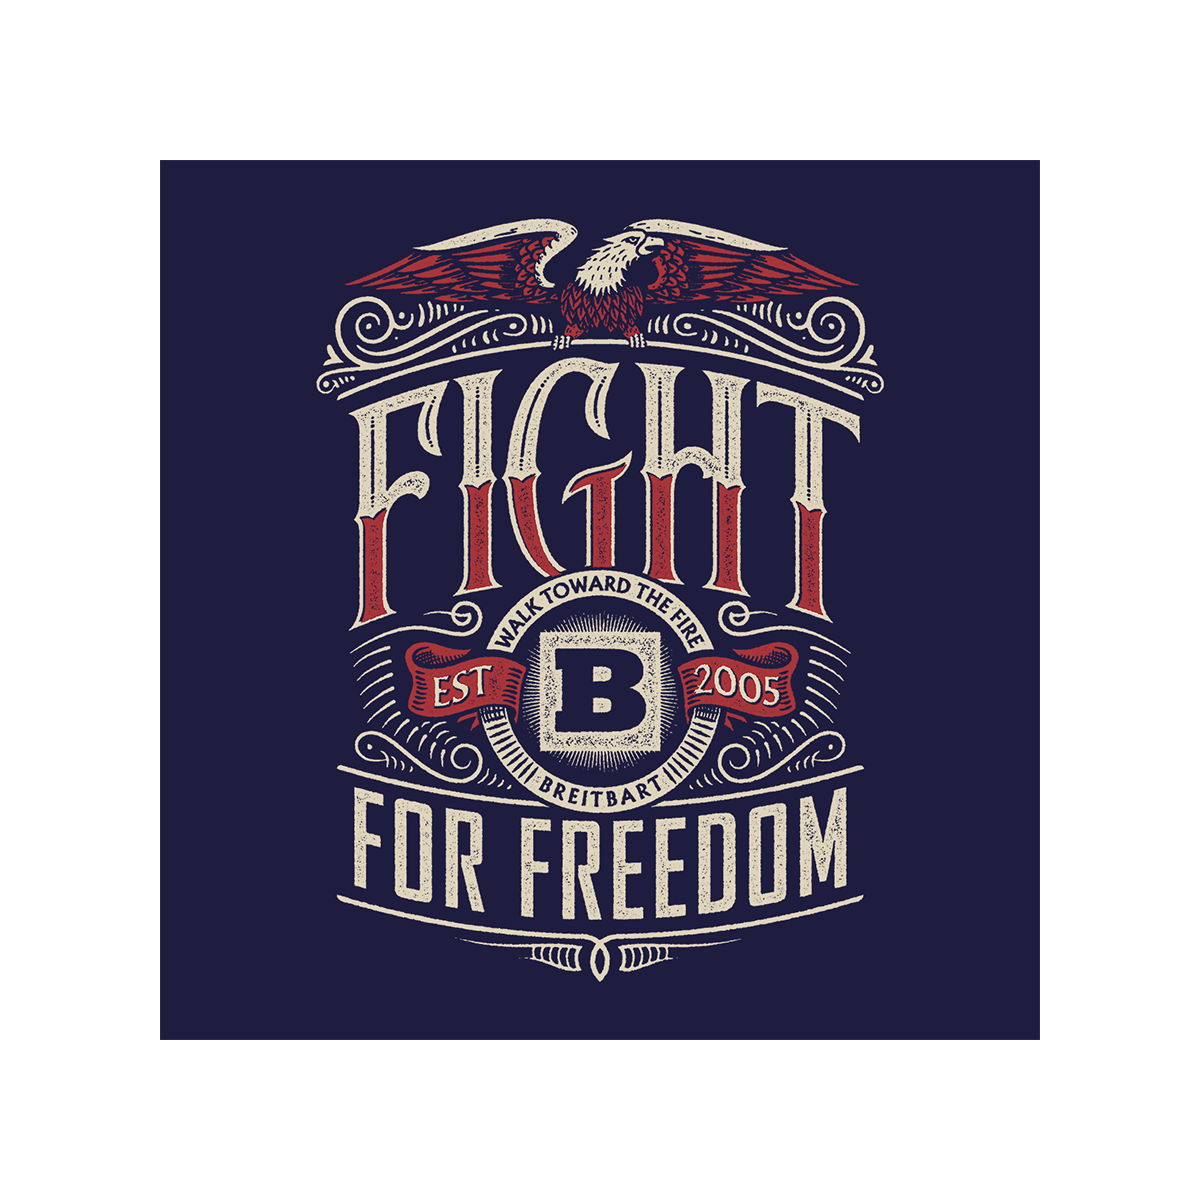 Fight for Freedom Women's T-shirt - Navy